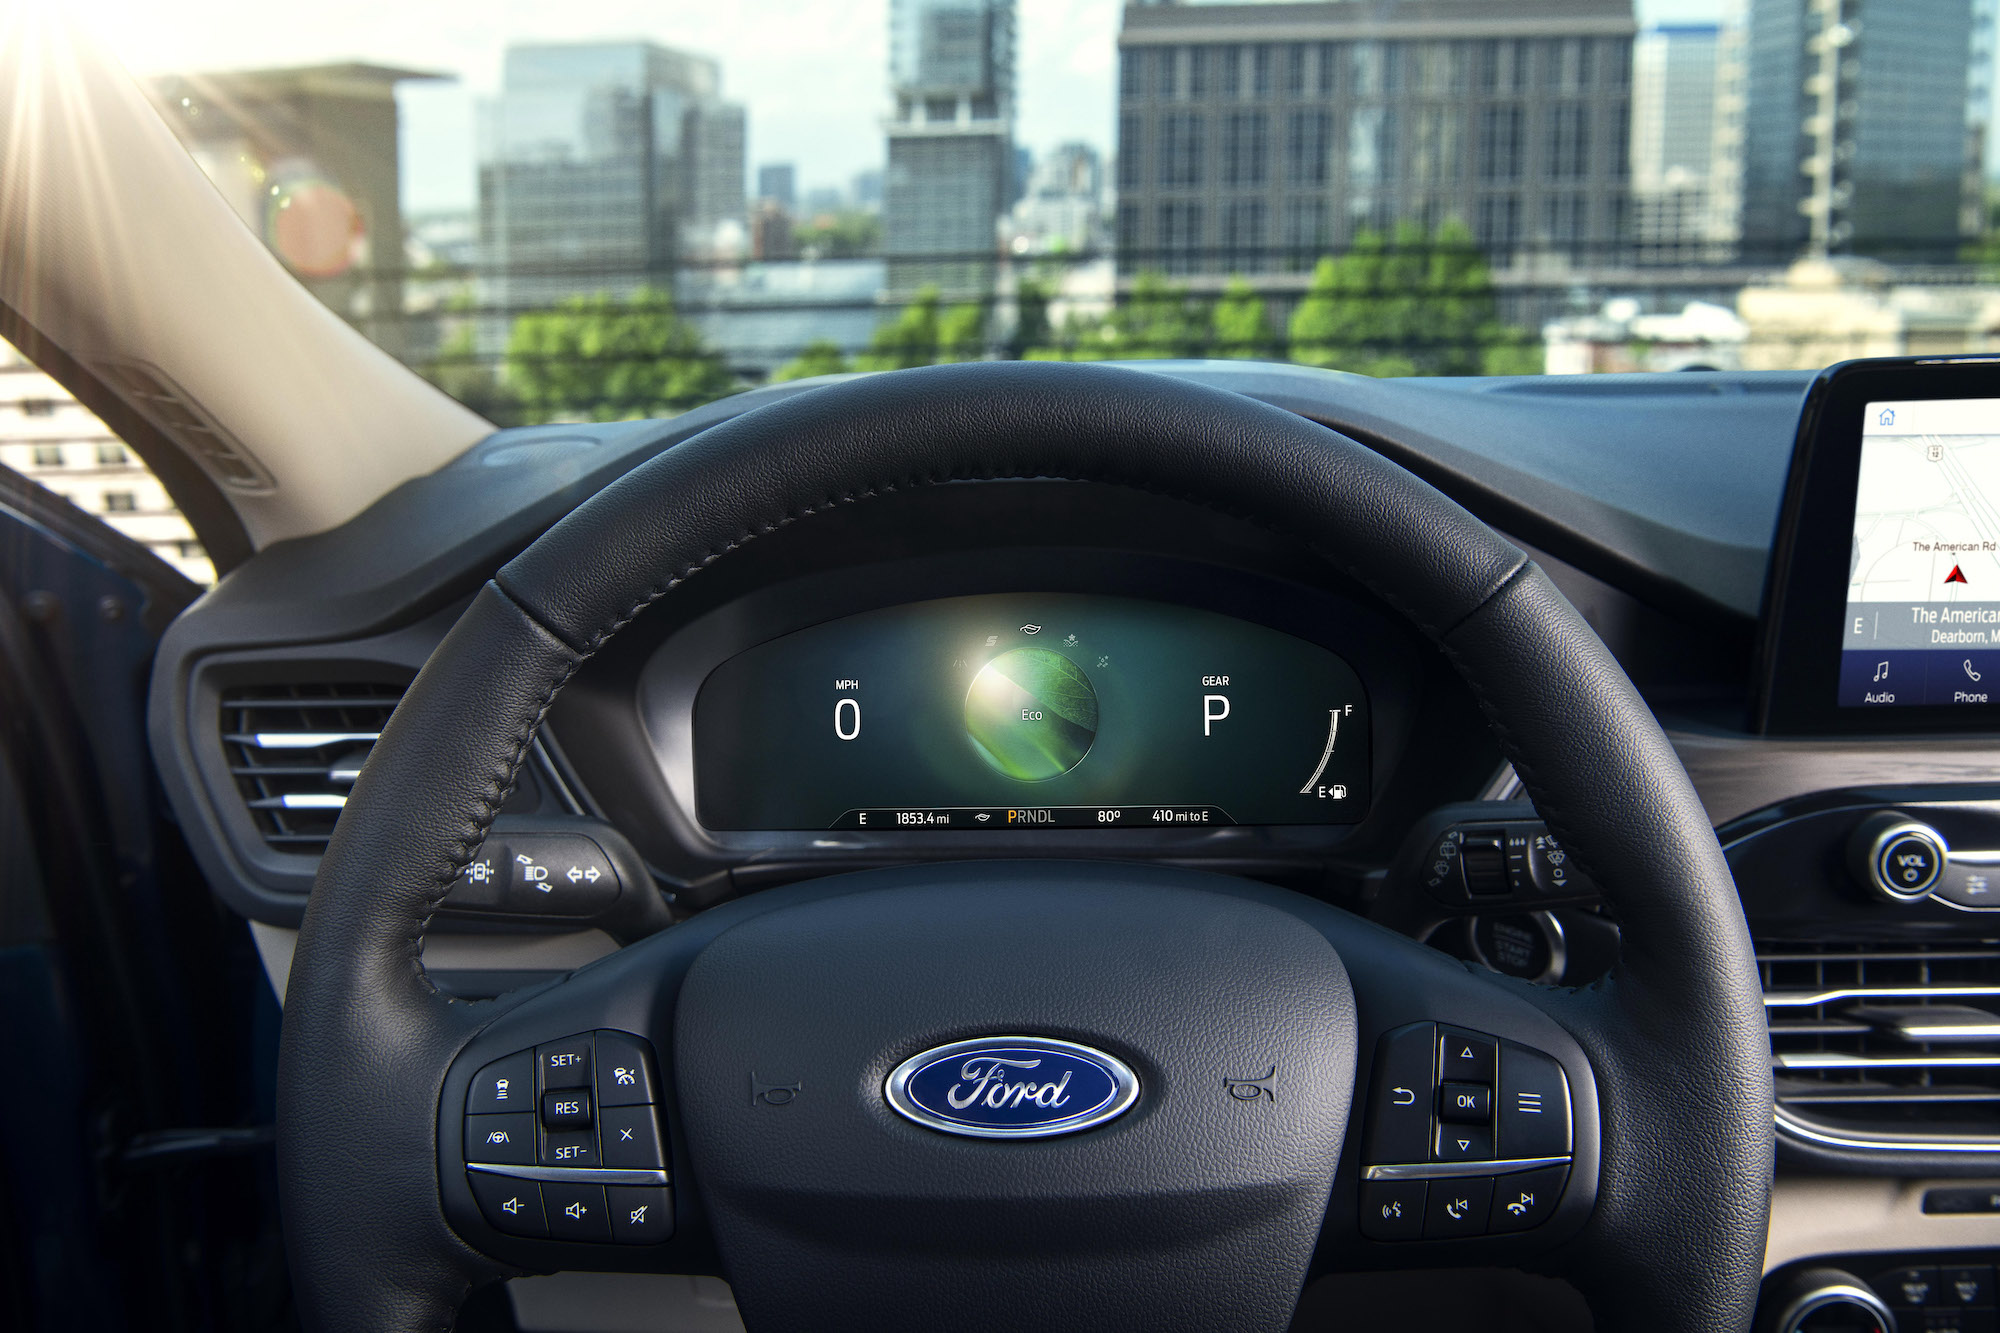 The black steering wheel and instrumentation panel of a 2020 Ford Escape Hybrid compact crossover SUV